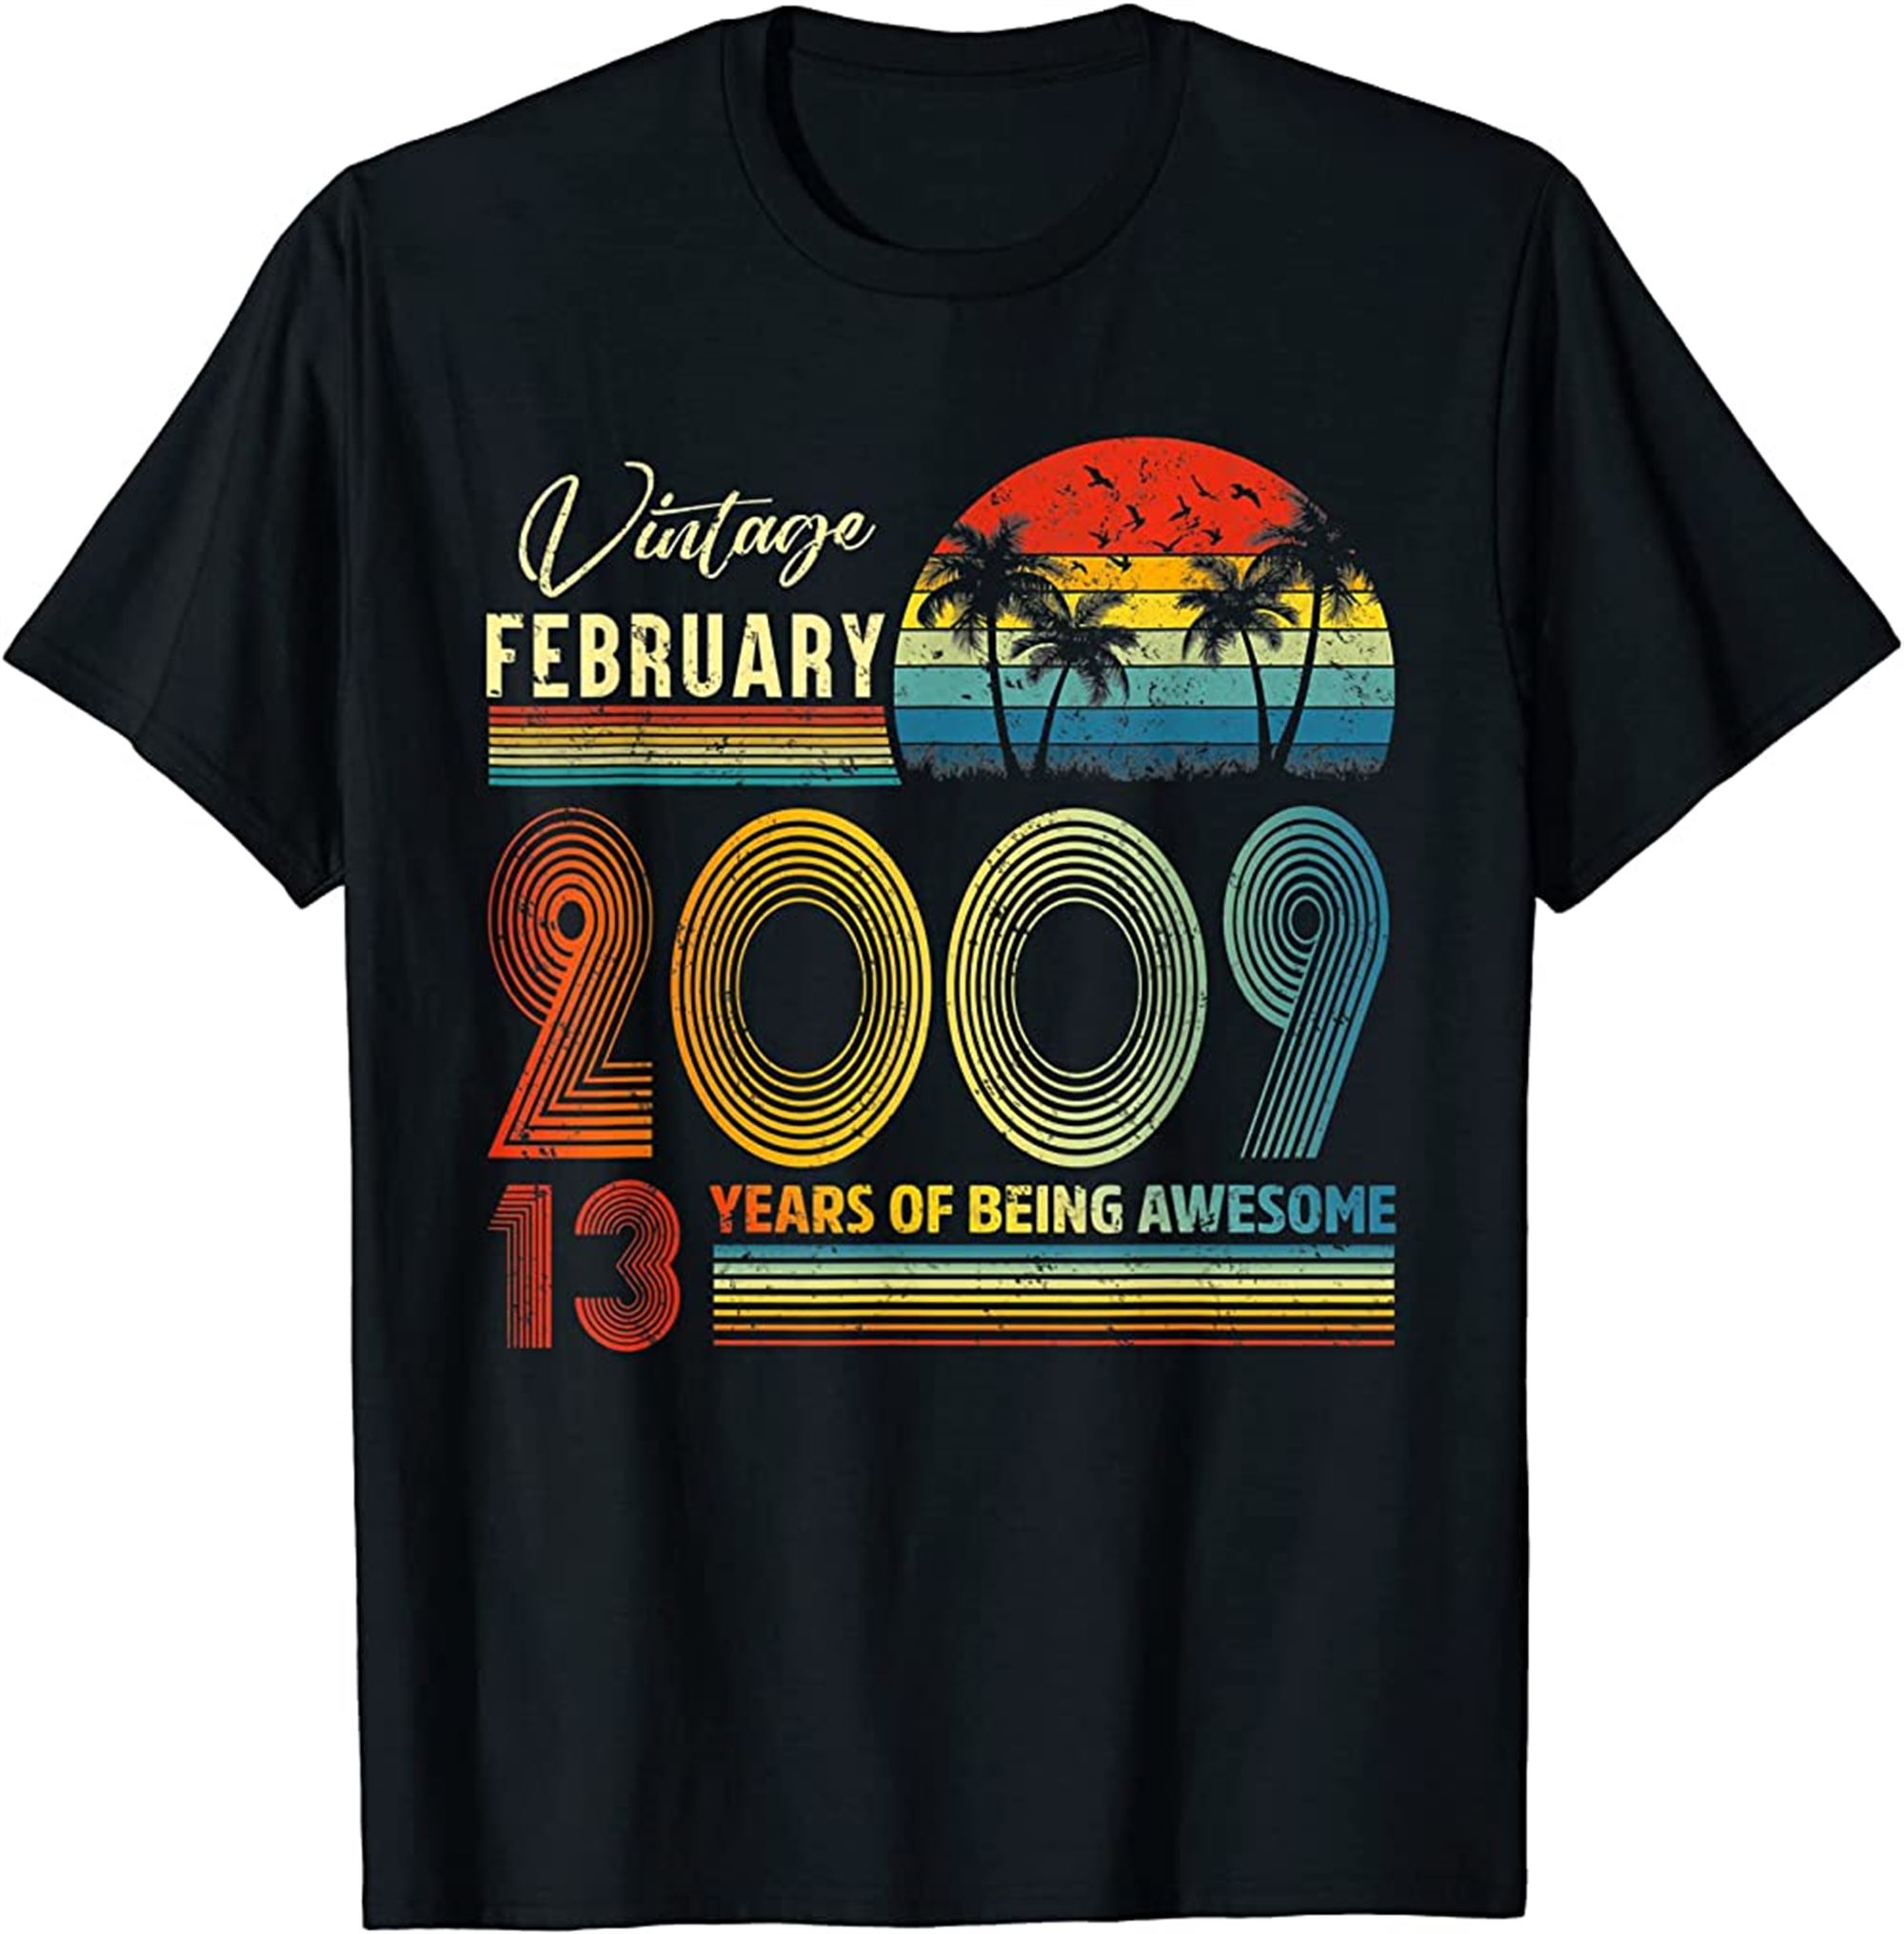 13th Birthday Vintage February 2009 13 Years Old Gifts T-shirt Full Size Up To 5xl